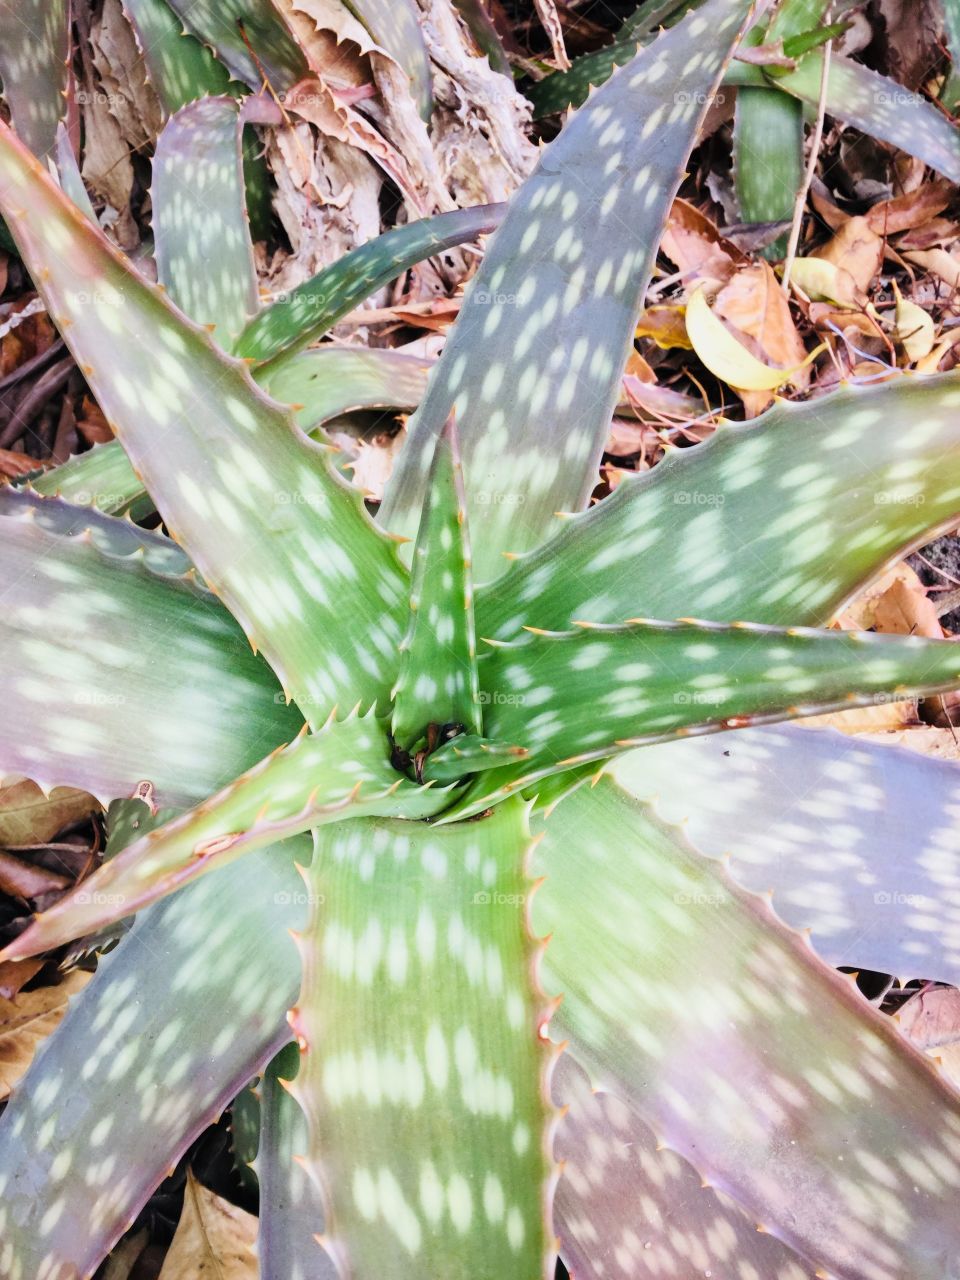 This shot is of a green and grey succulent. It shows the layers of the plant’s leaves.